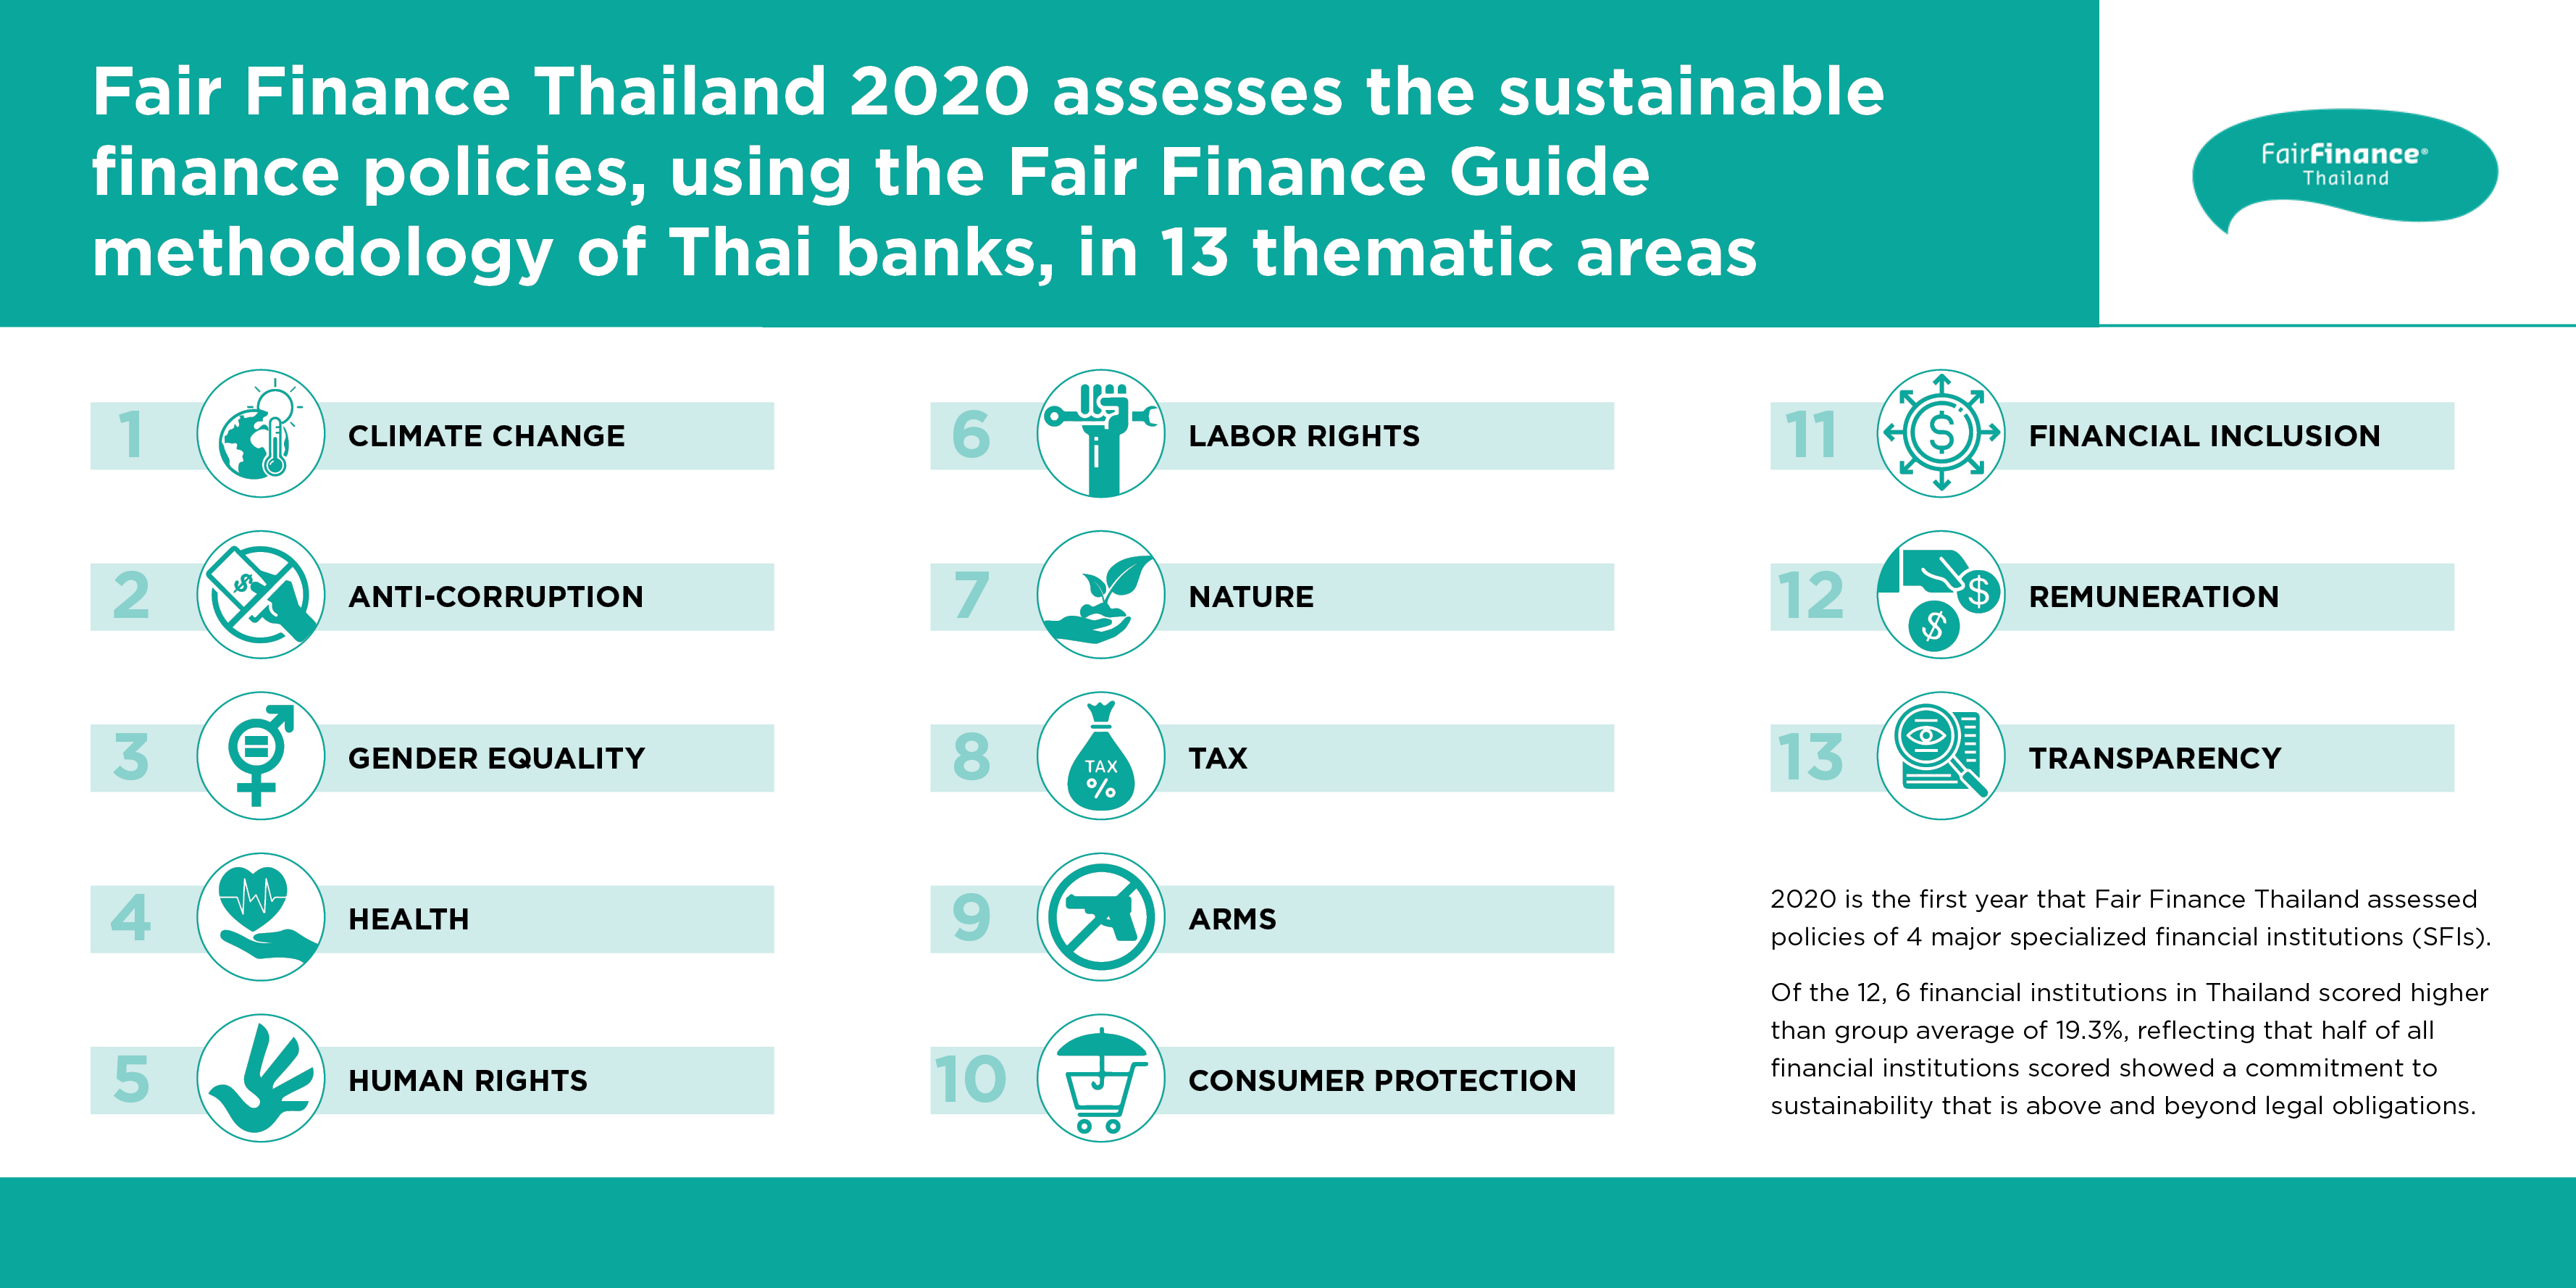 PRESS RELEASE: FAIR FINANCE THAILAND LAUNCHES ITS THIRD ASSESSMENT ON SUSTAINABLE FINANCE POLICIES OF THAI BANKS, AT THE “BANKING FOR BETTER: FROM CRISIS TO SUSTAINABILITY” ONLINE EVENT